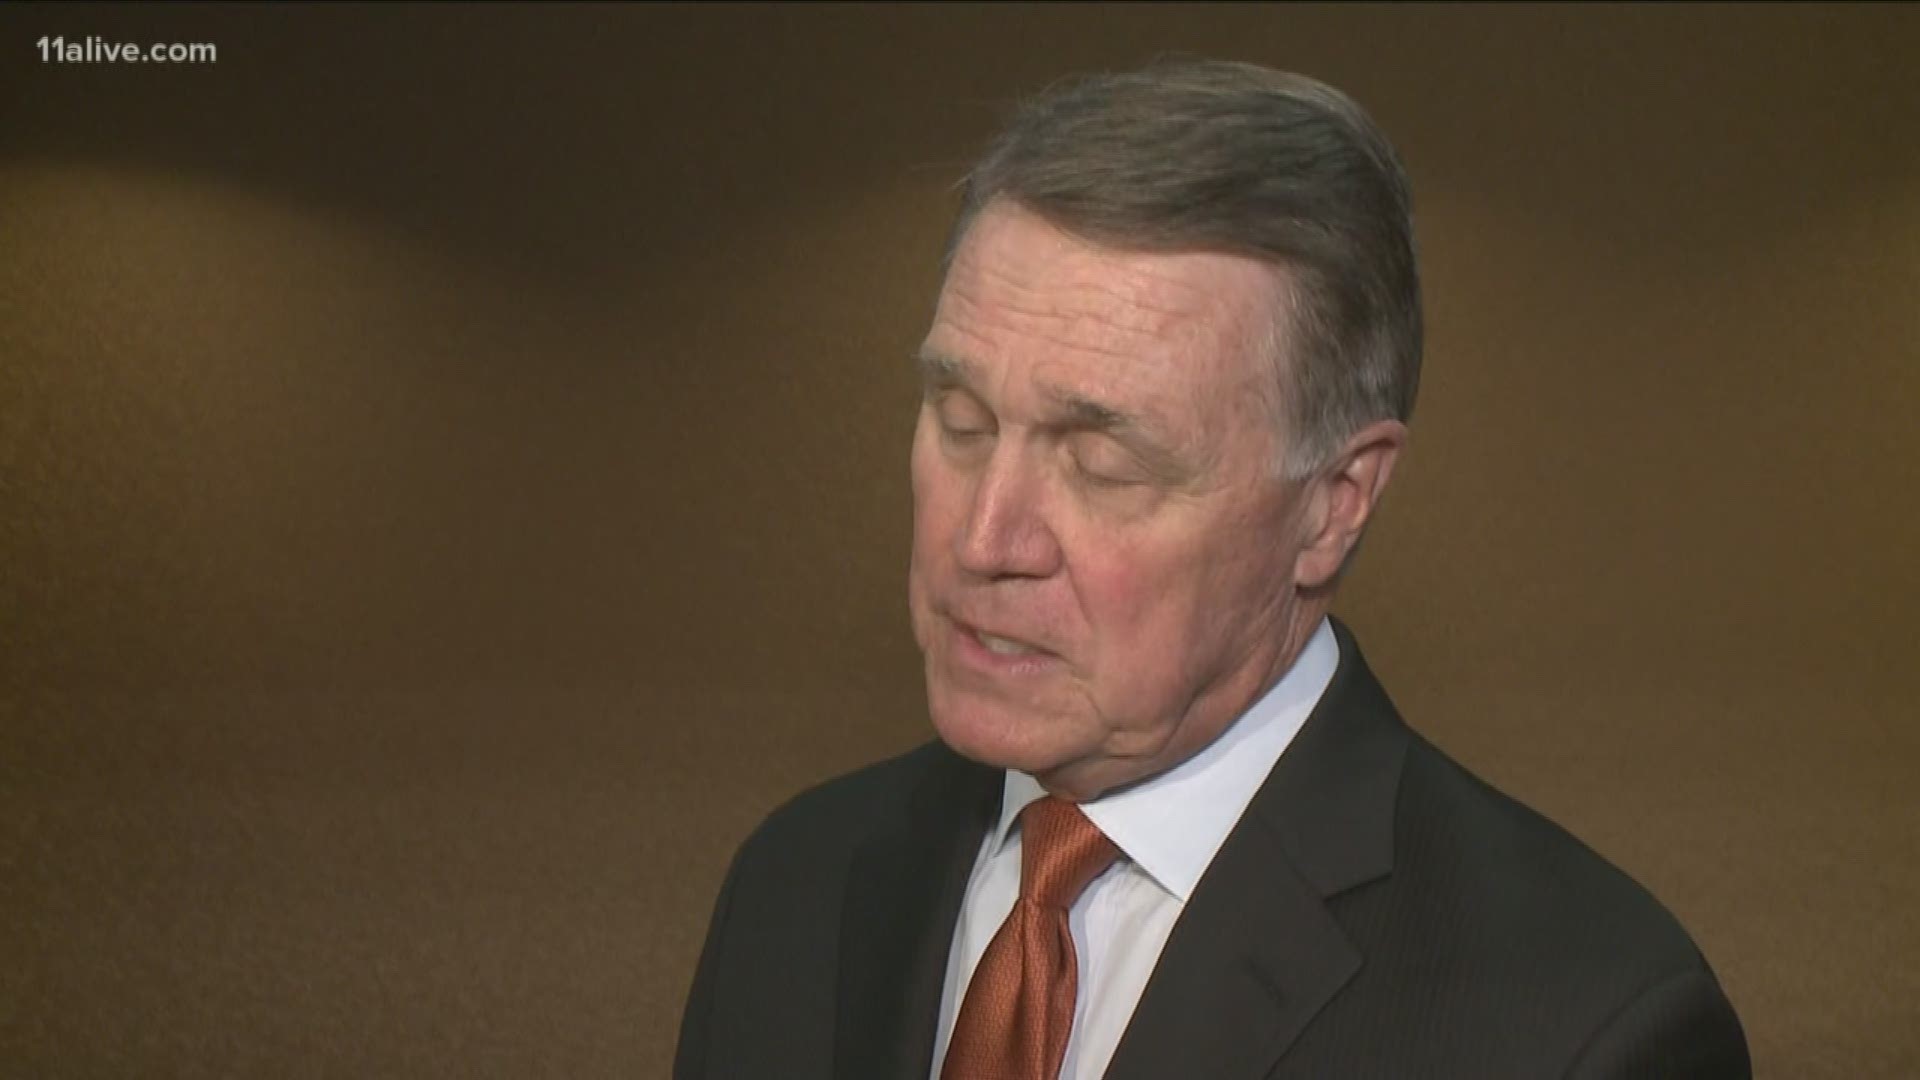 Perdue said he wants political parties together on gun laws.